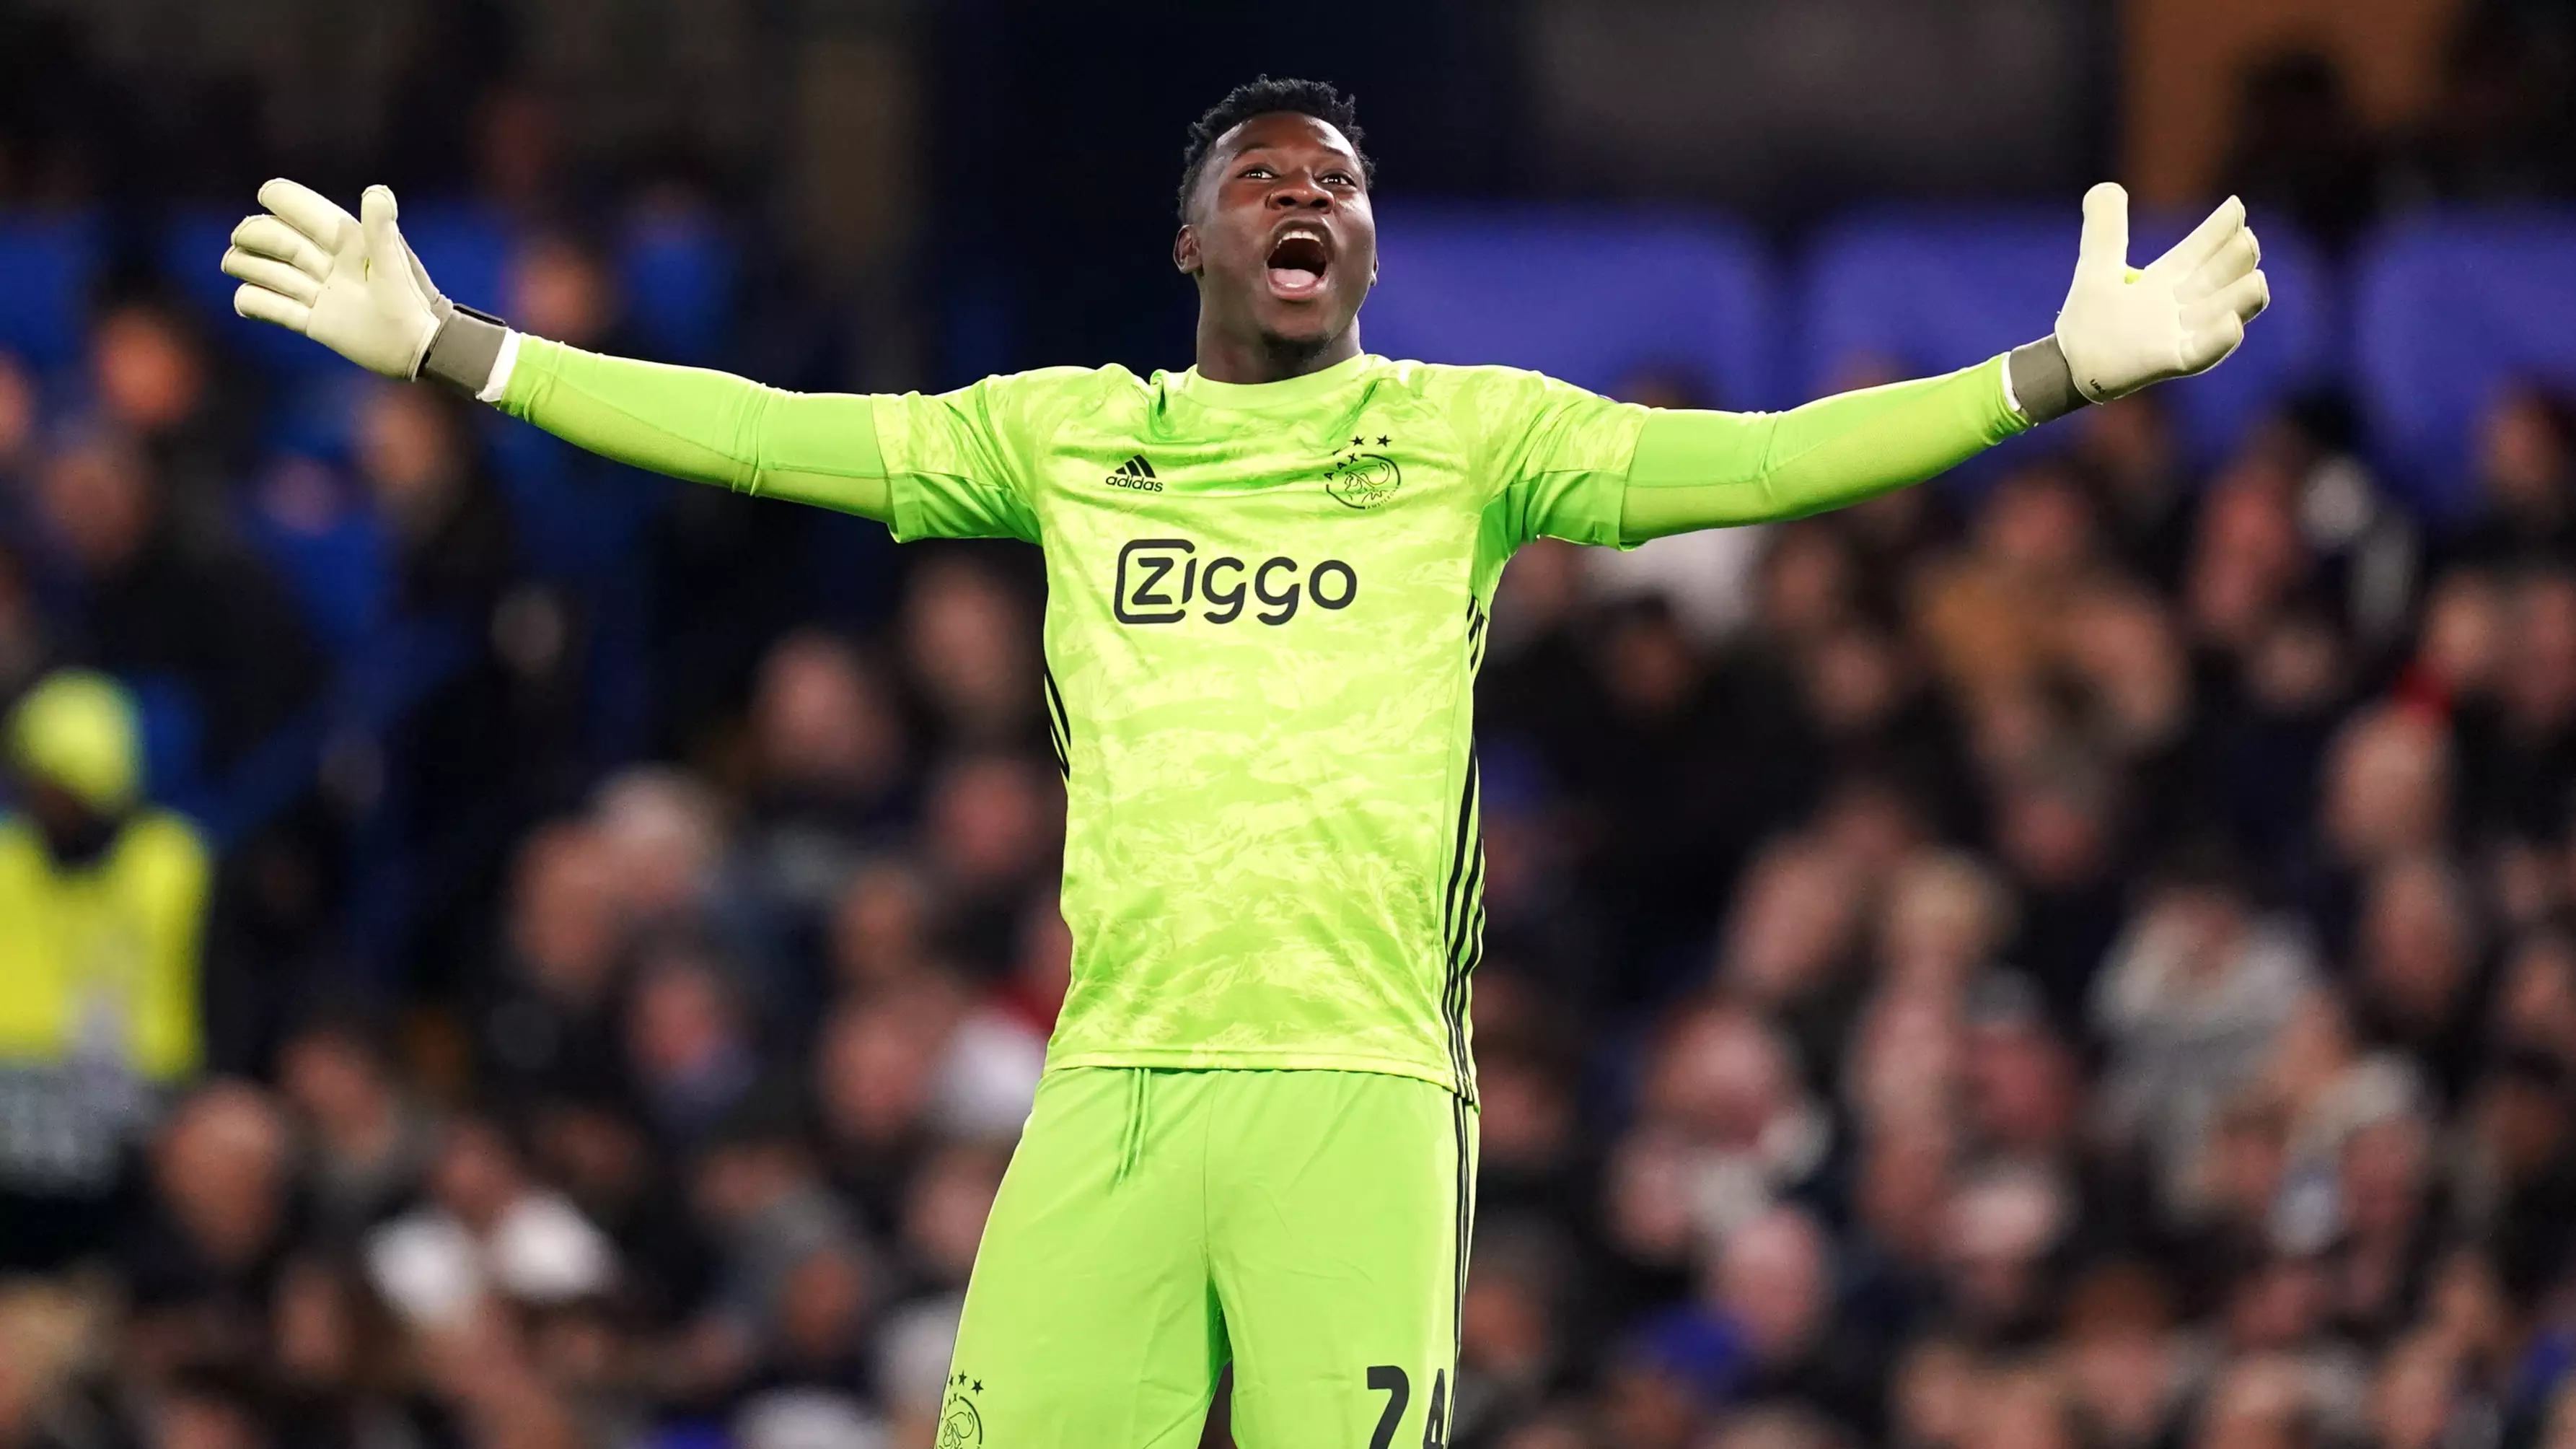 Ajax Goalkeeper Andre Onana Says Club Passed On Signing Him Because Of His Skin Colour